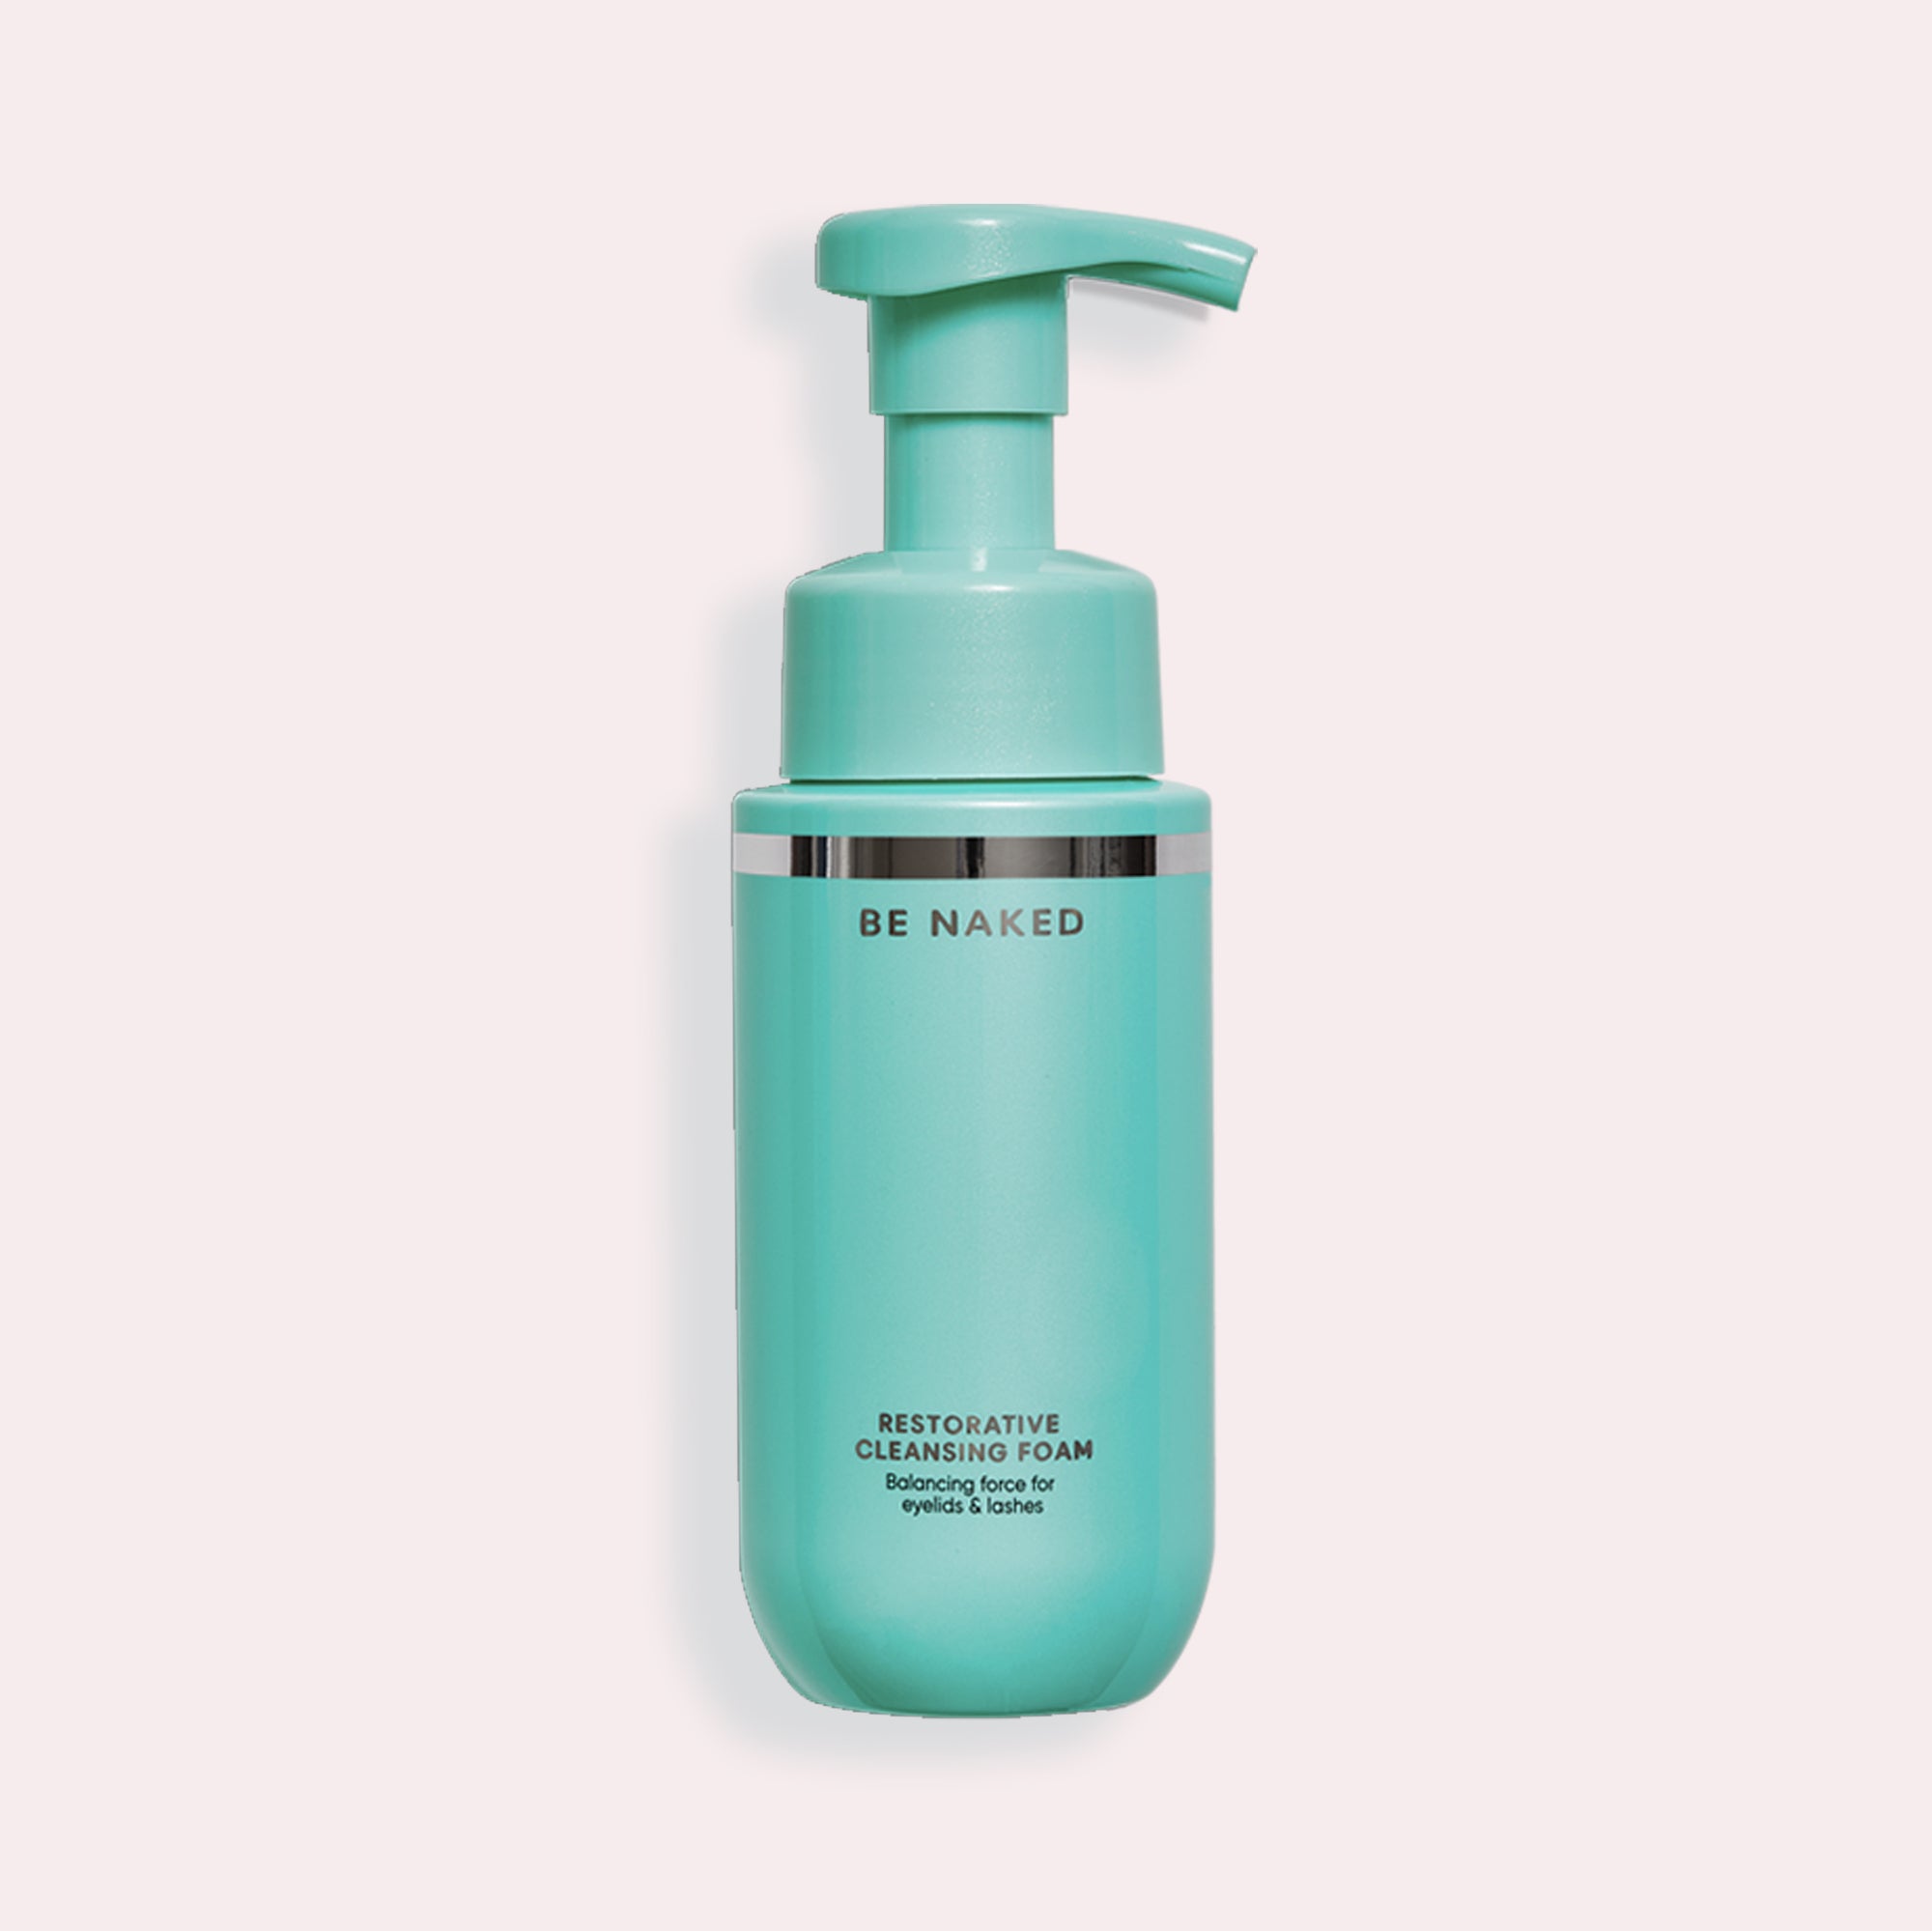 Be Naked Restorative Cleansing Foam